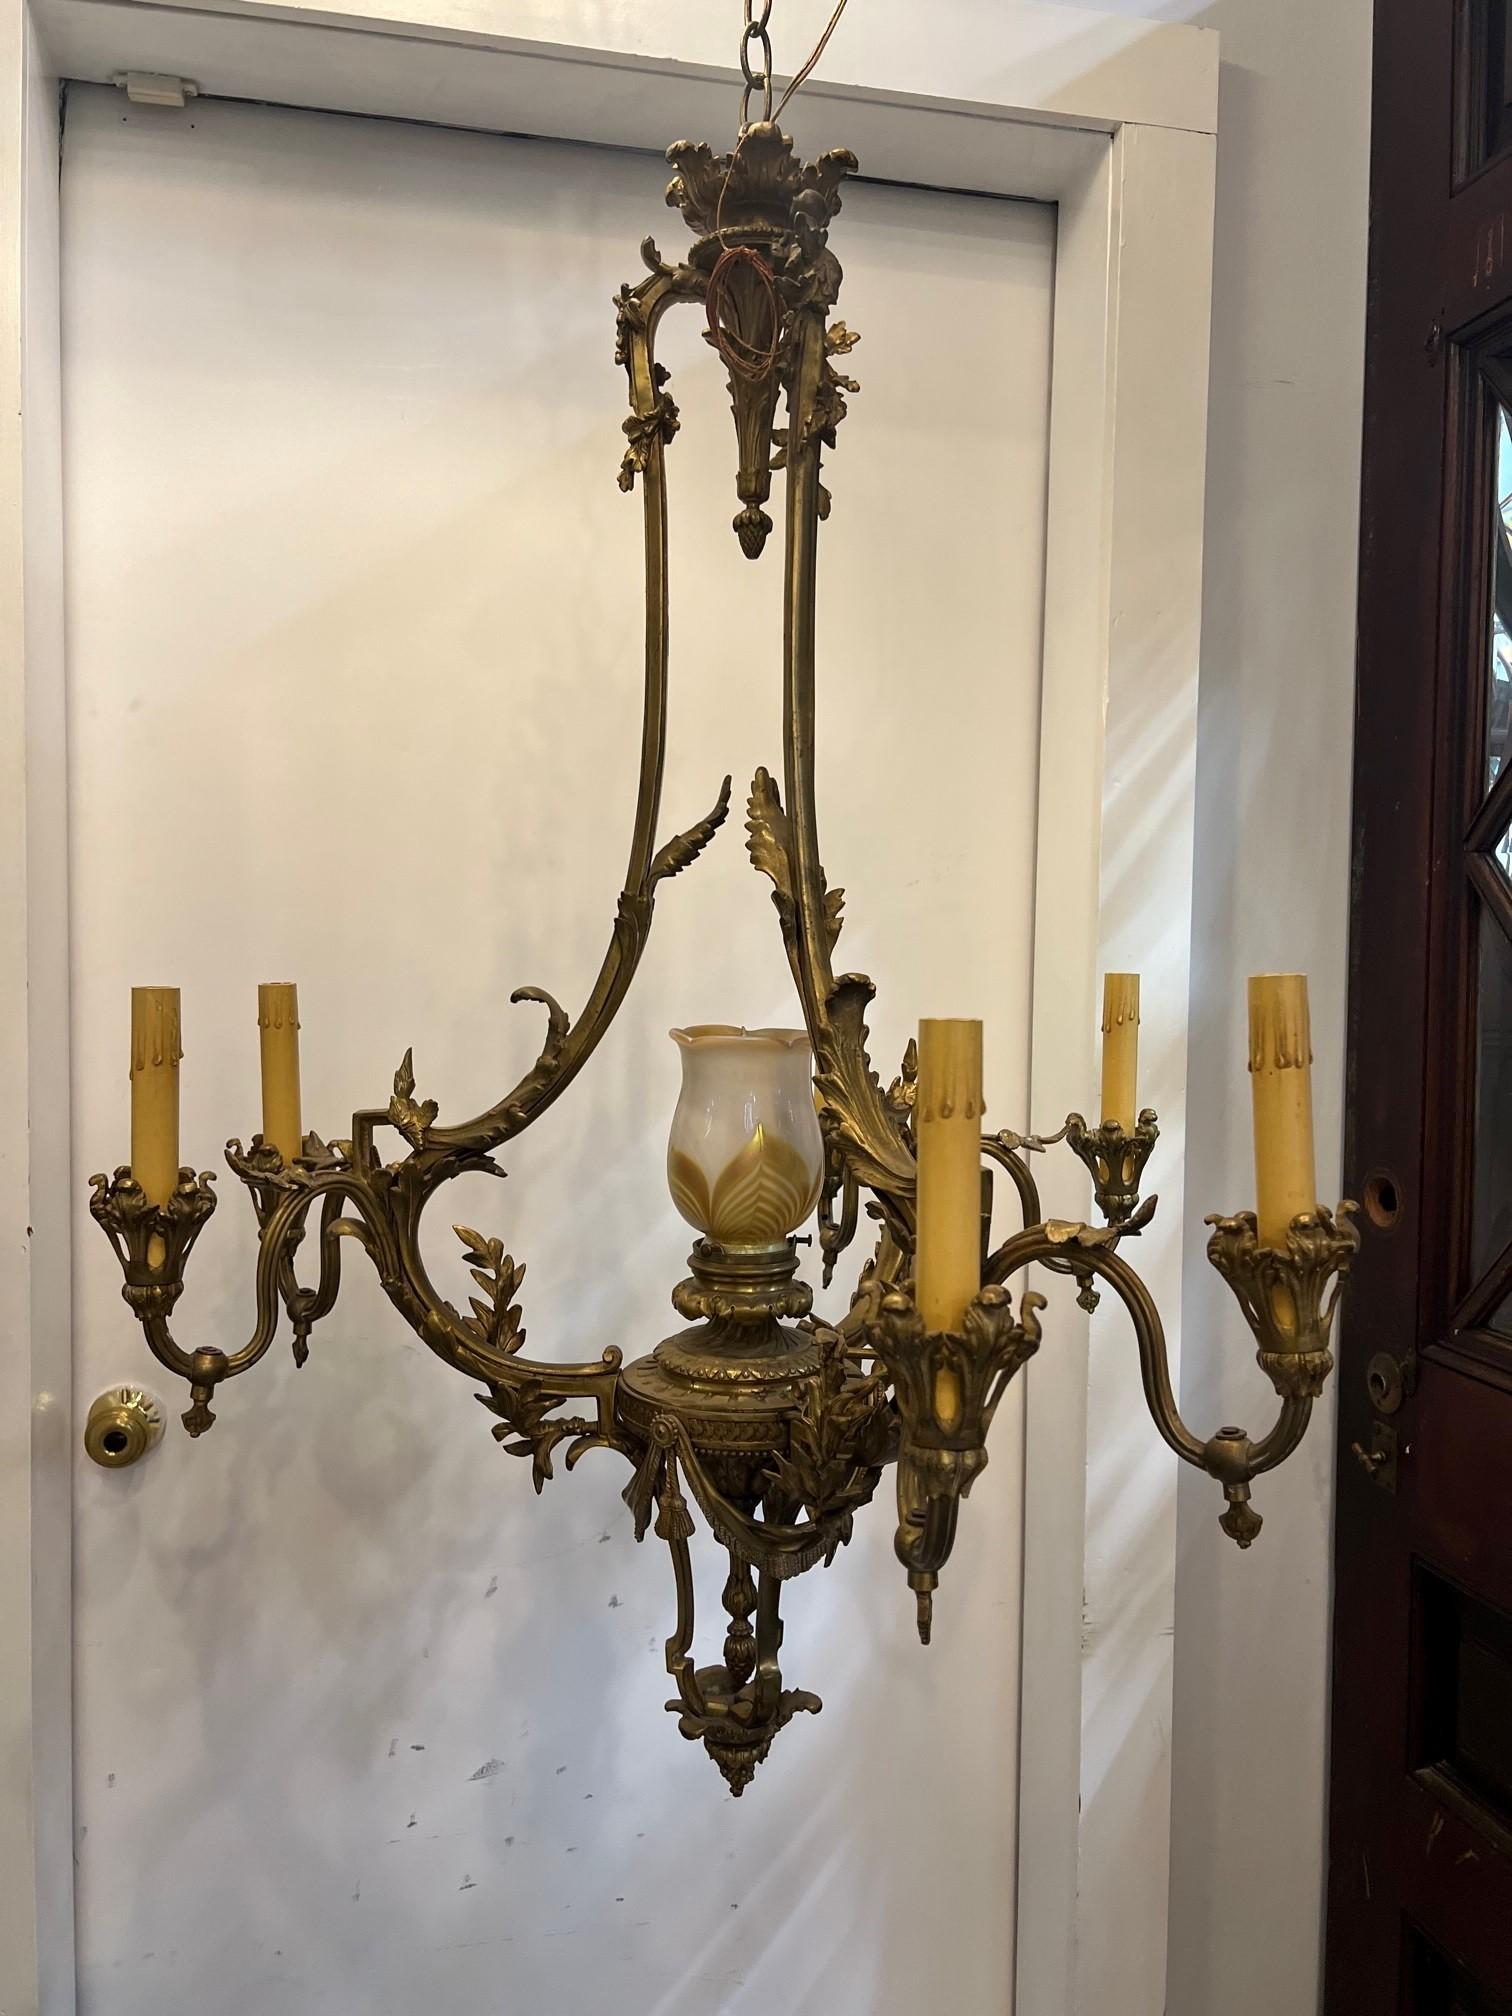  Antique French Louis XV style bronze chandelier with a center glass globe. It has three decorative arms with two candelabra lights on each and one light in the center with a art glass globe. The chandelier has been wired recently and the glass